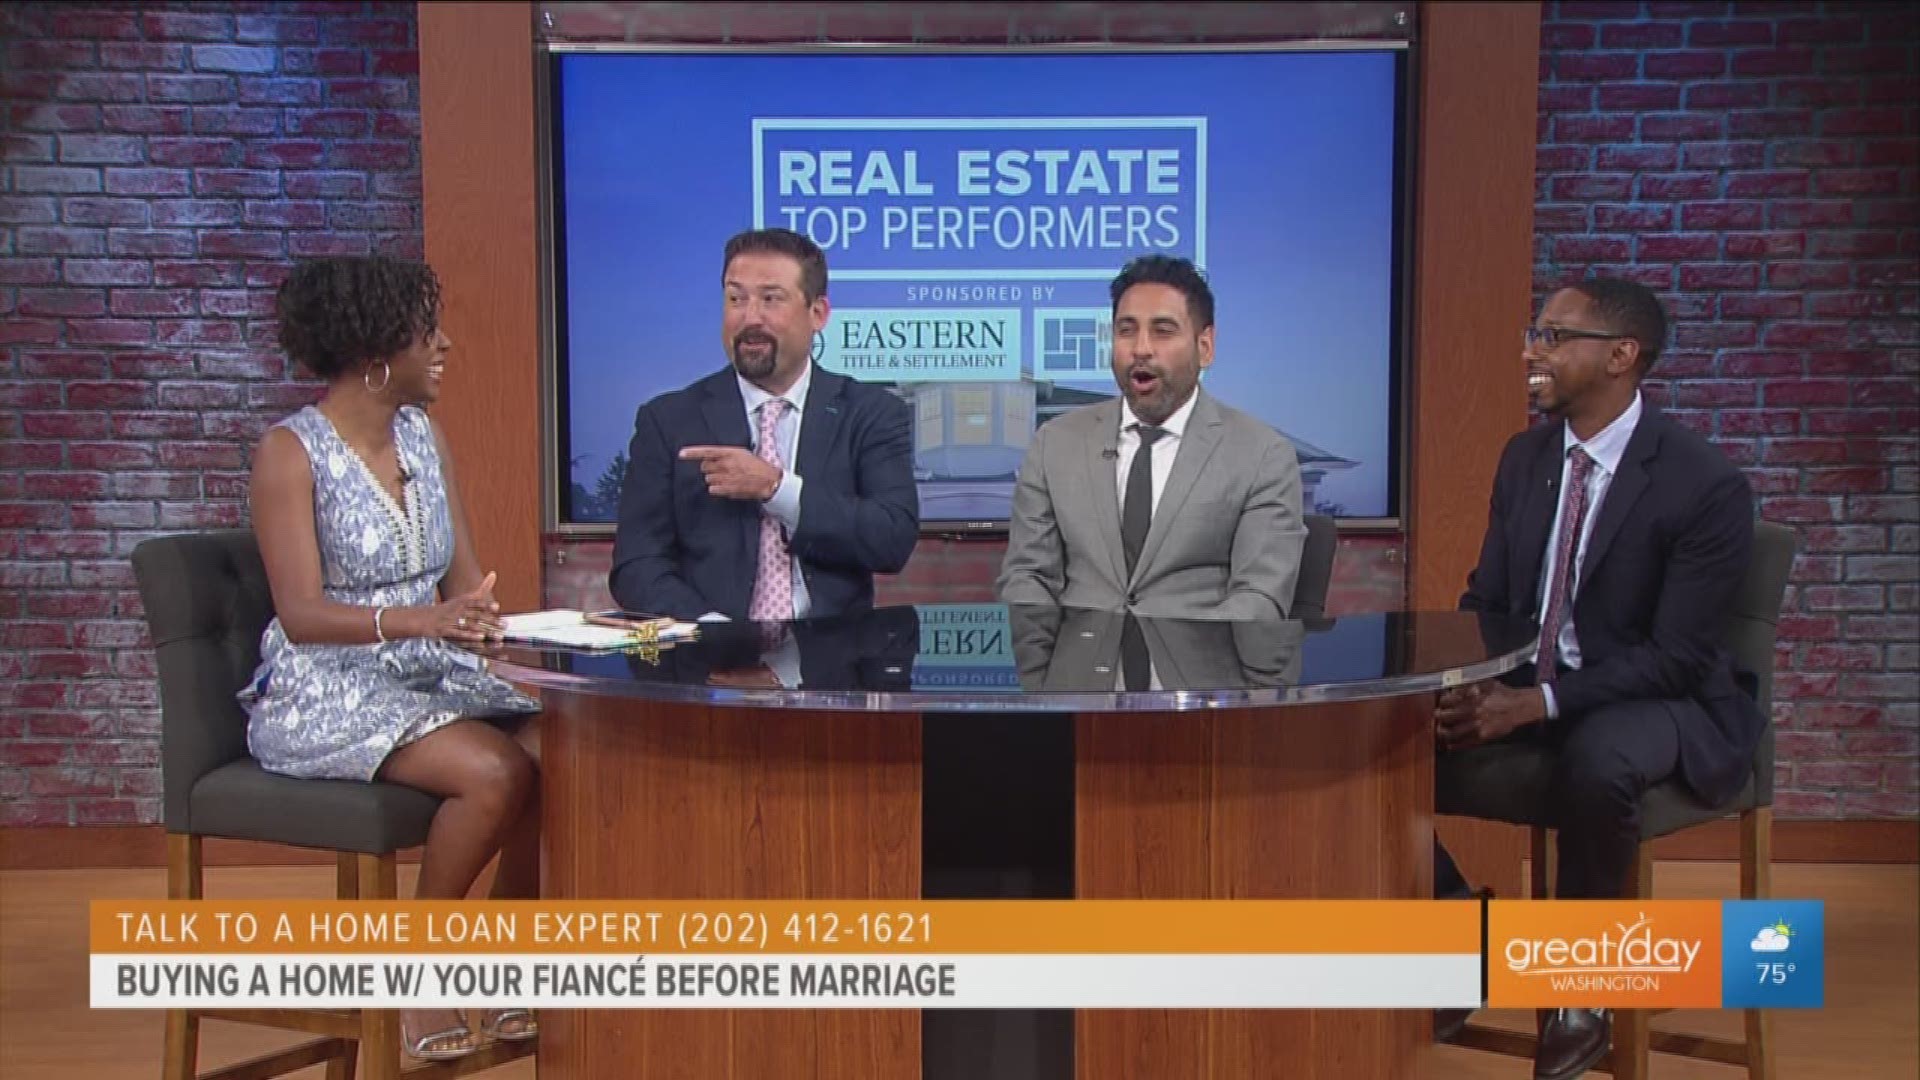 The Real Estate Top Performers weigh in on buying a home with your mate before you get married.  Markette gets the pros and cons from Josh Greene of Eastern Title & Settlement, Lou Vivas of Keller Williams Capital Properties, and Sean Watson of The Mortgage Link.  To reach Sean for home financing inquiries call (202) 412-1621.  To reach Lou for homebuying inquiries send an email to lou@vivathelife.com